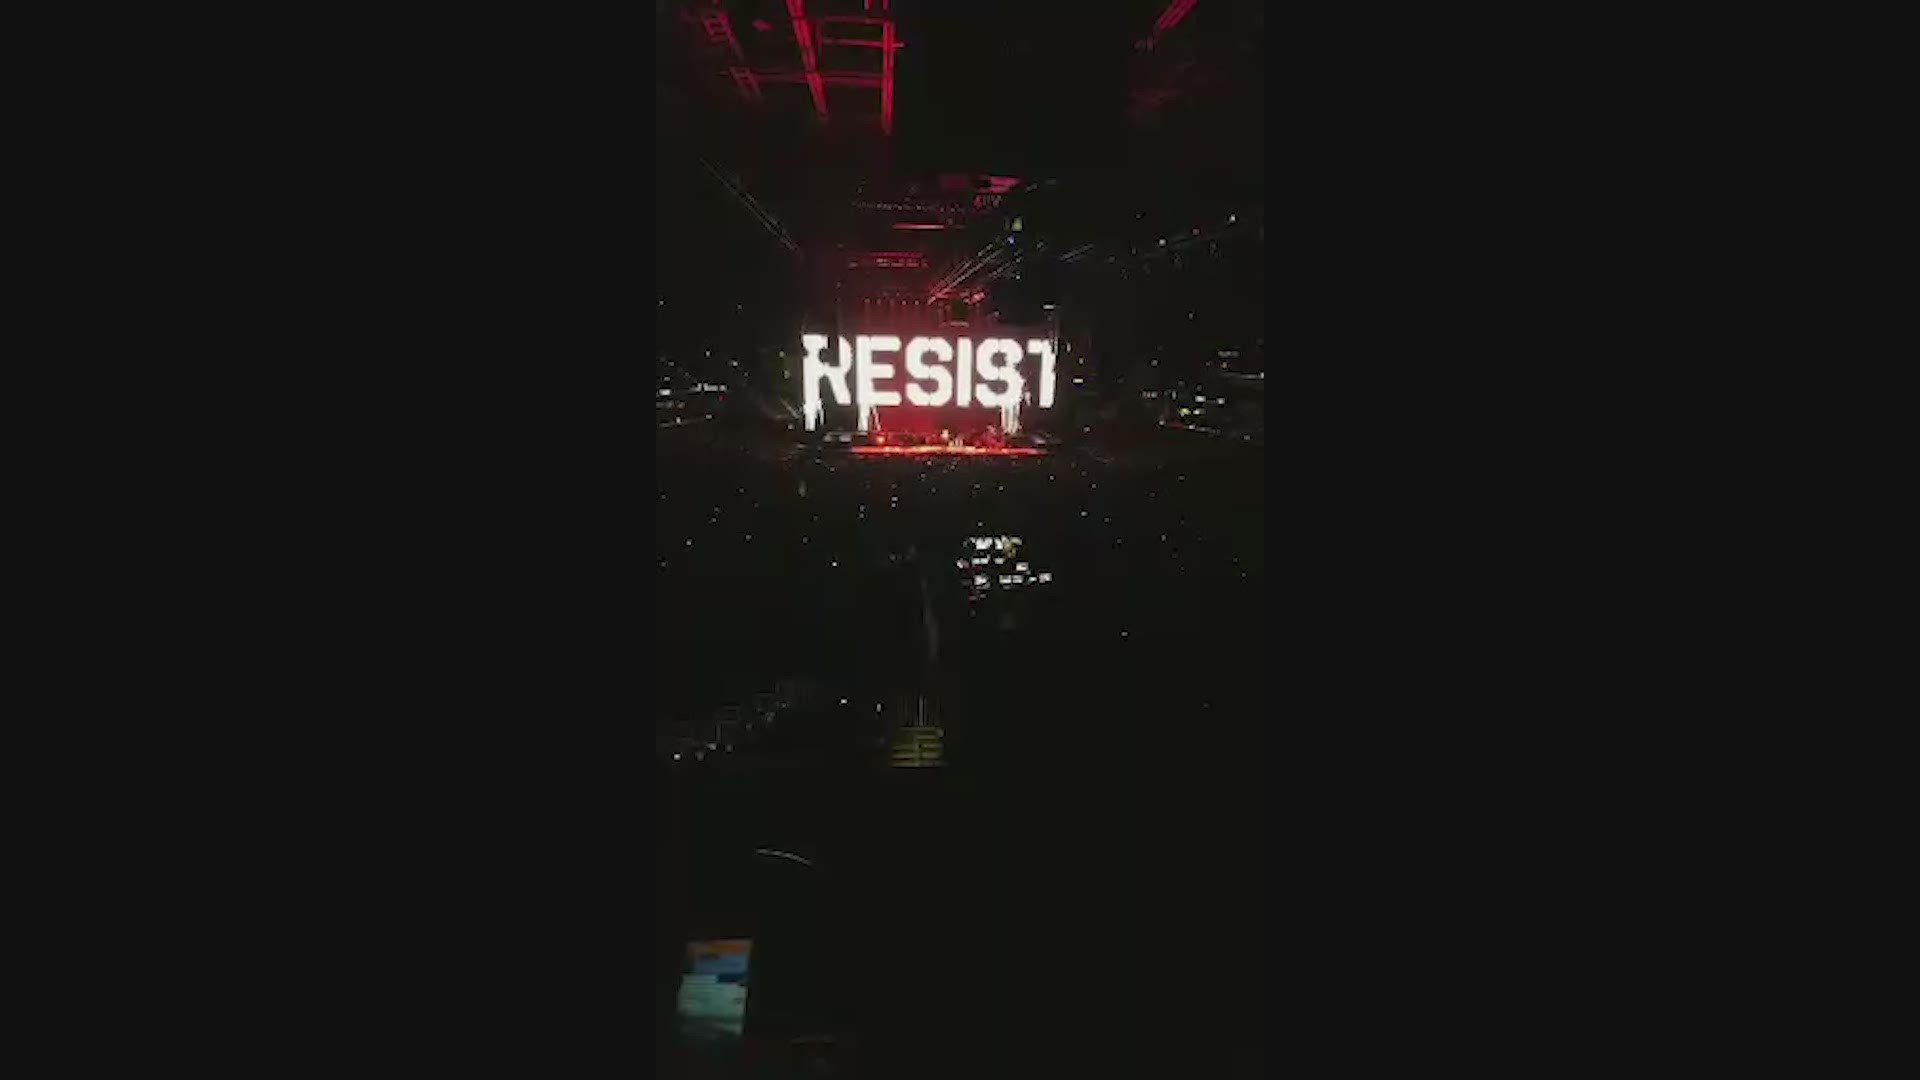 Roger Waters calls out WKYC during concert